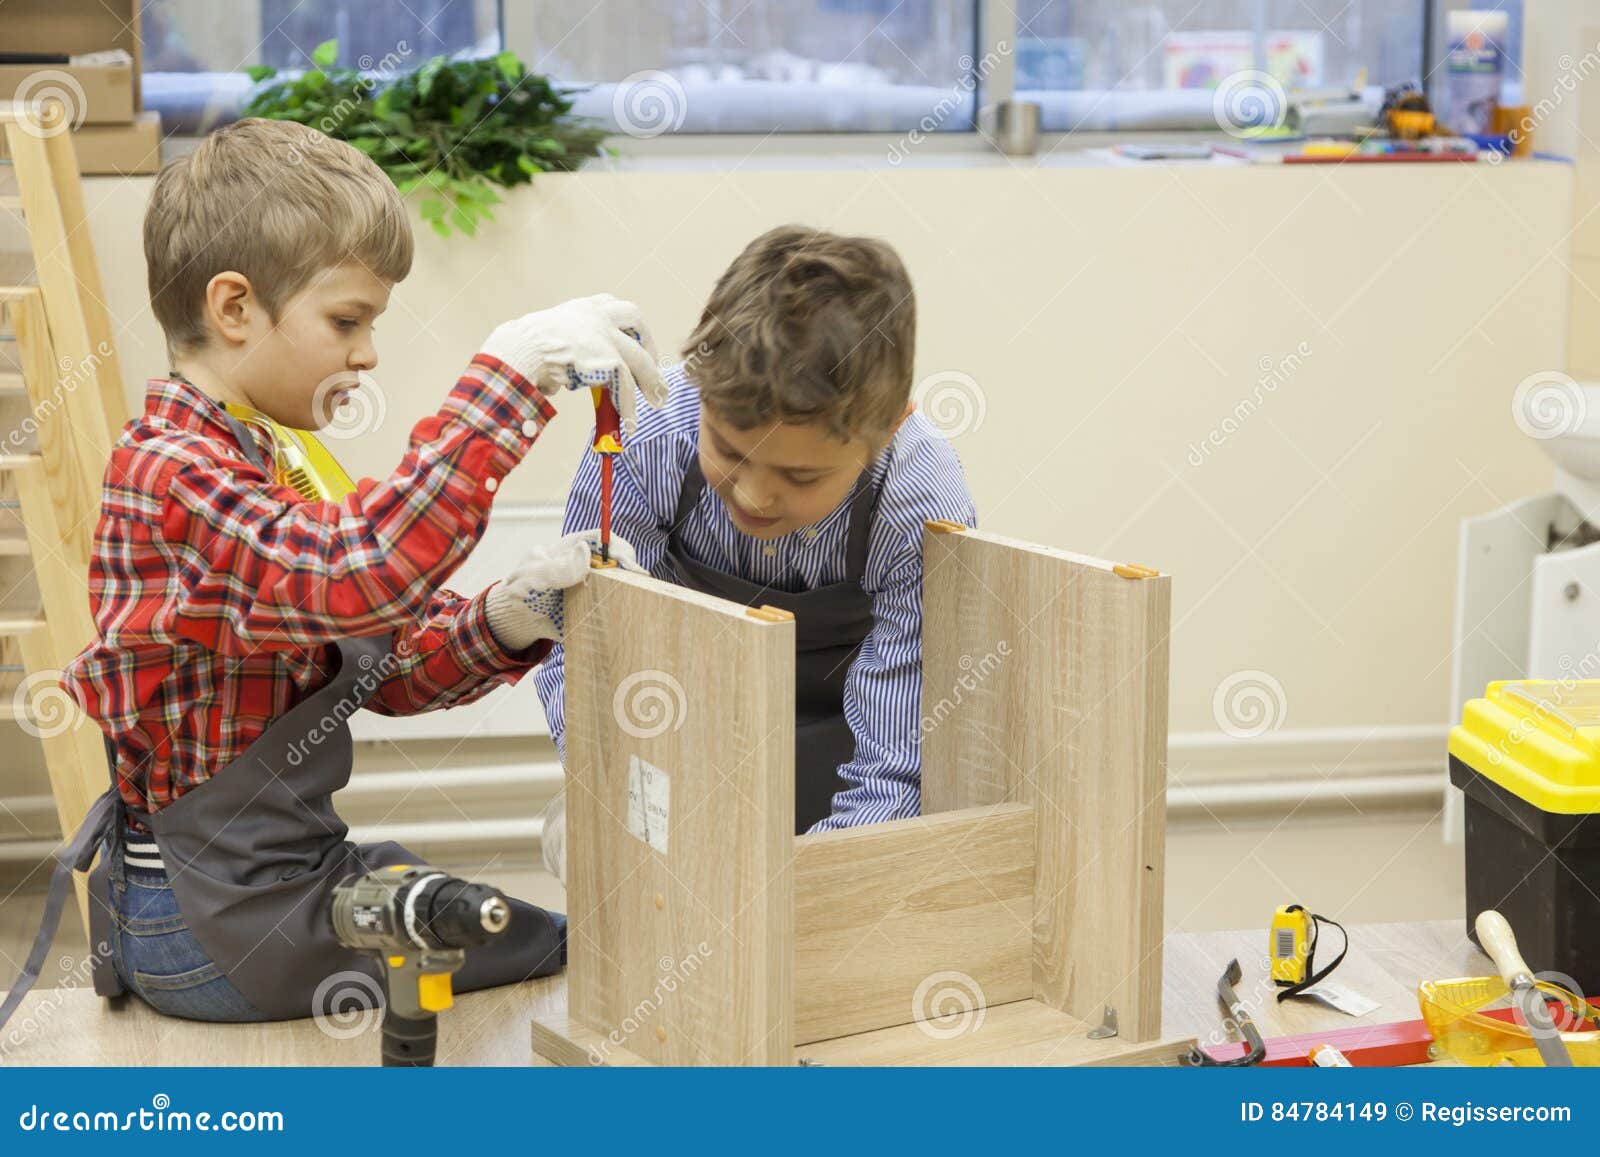 young boys construct wooden stool